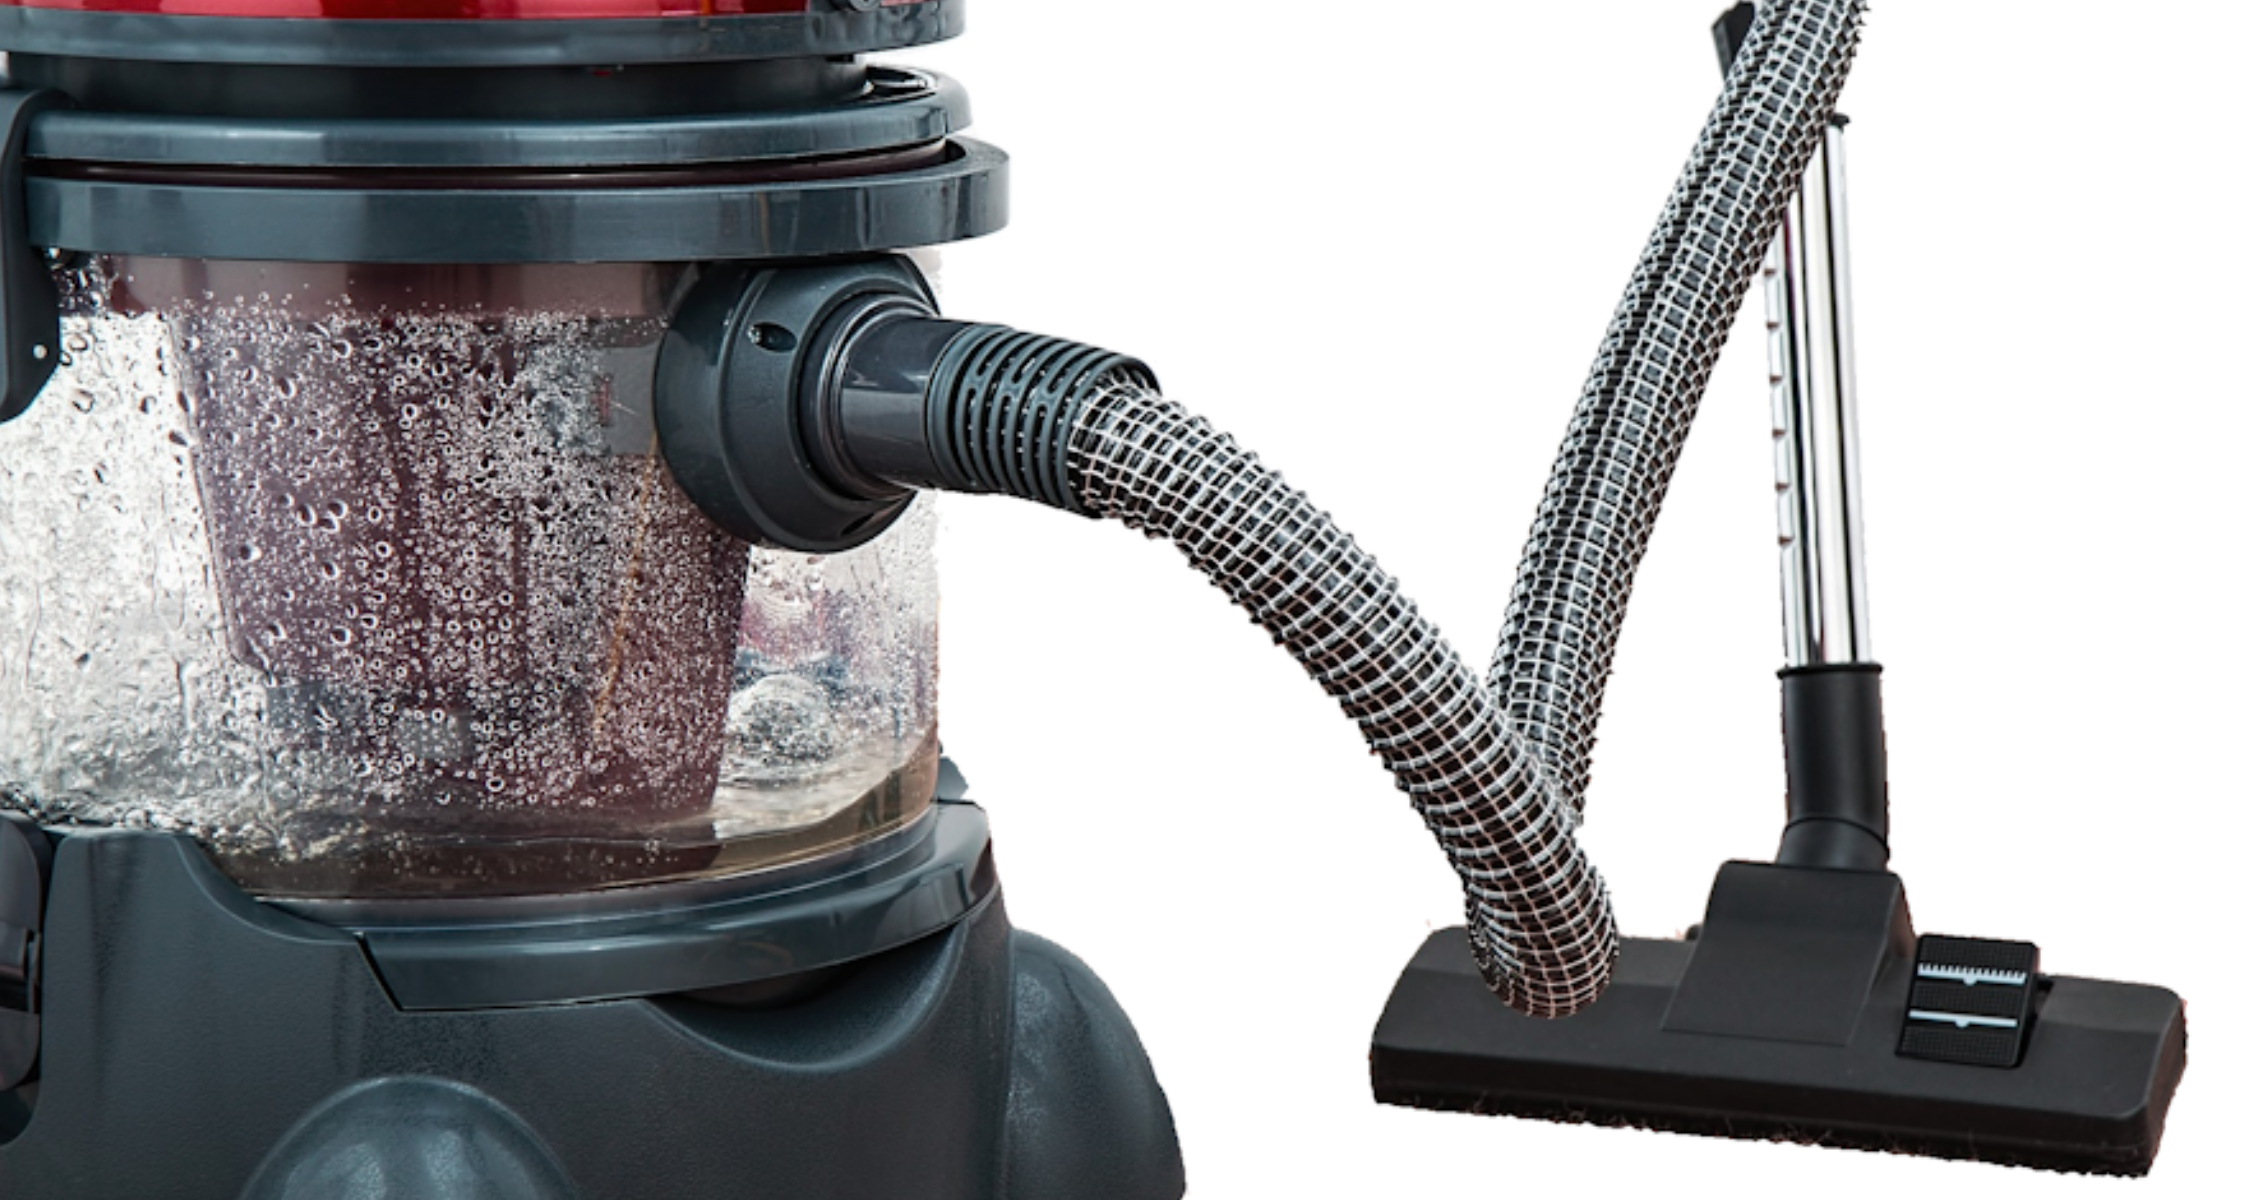 Vaccum cleaner with hose and attachment